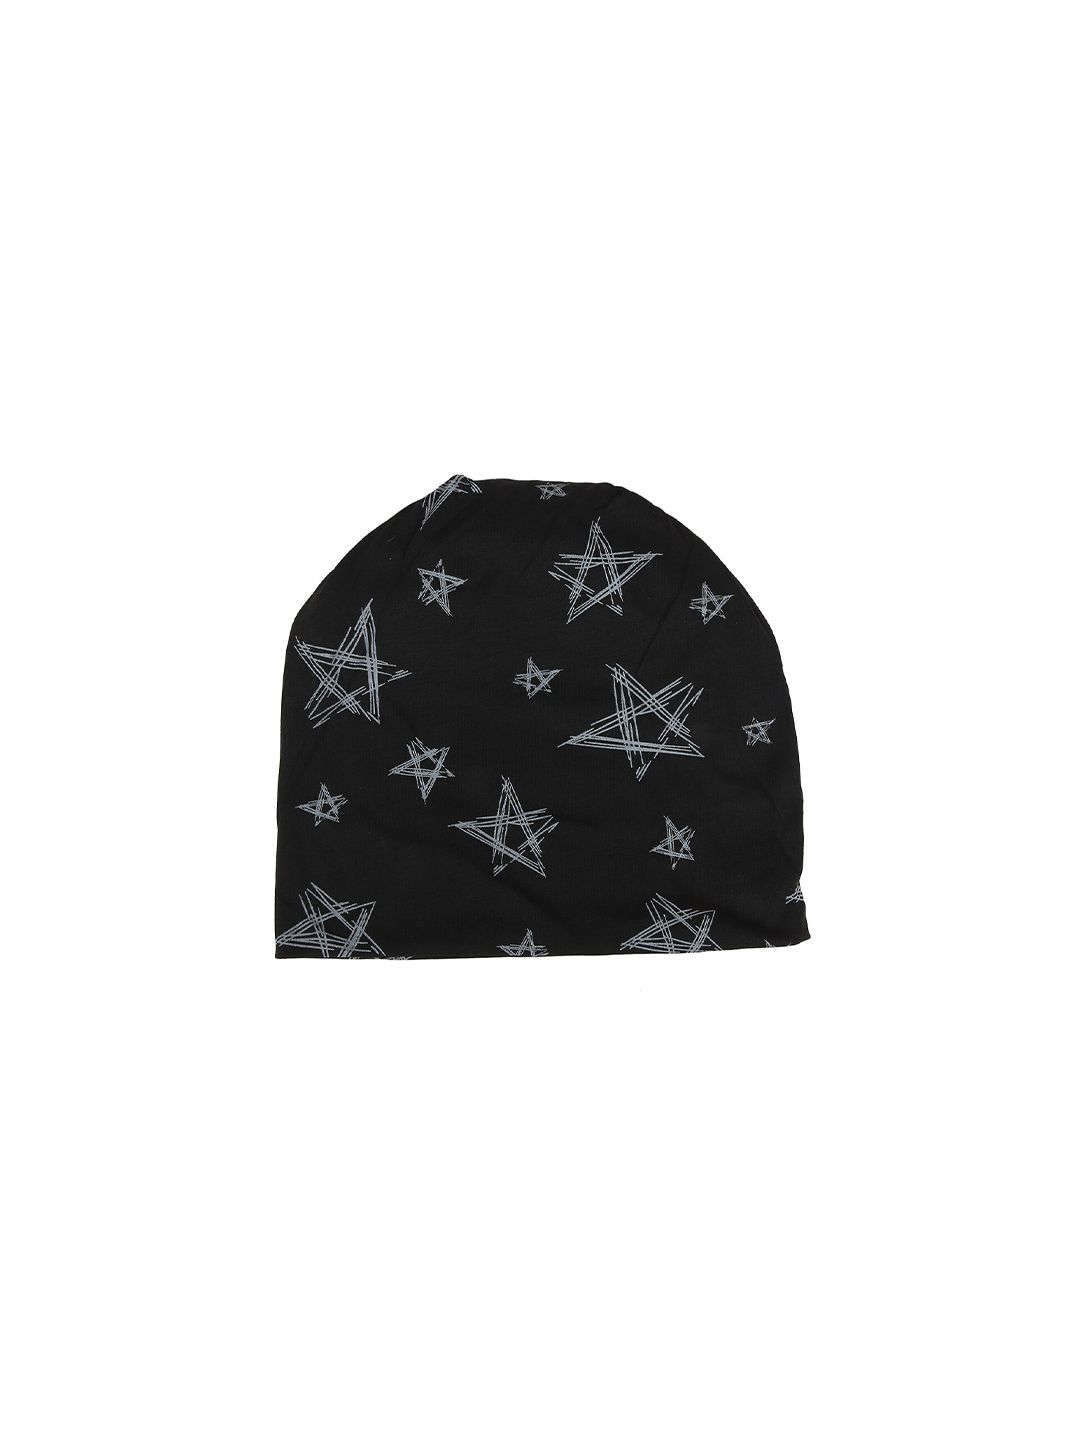 iSWEVEN Unisex Black & Grey Printed Cotton Beanie Cap Price in India